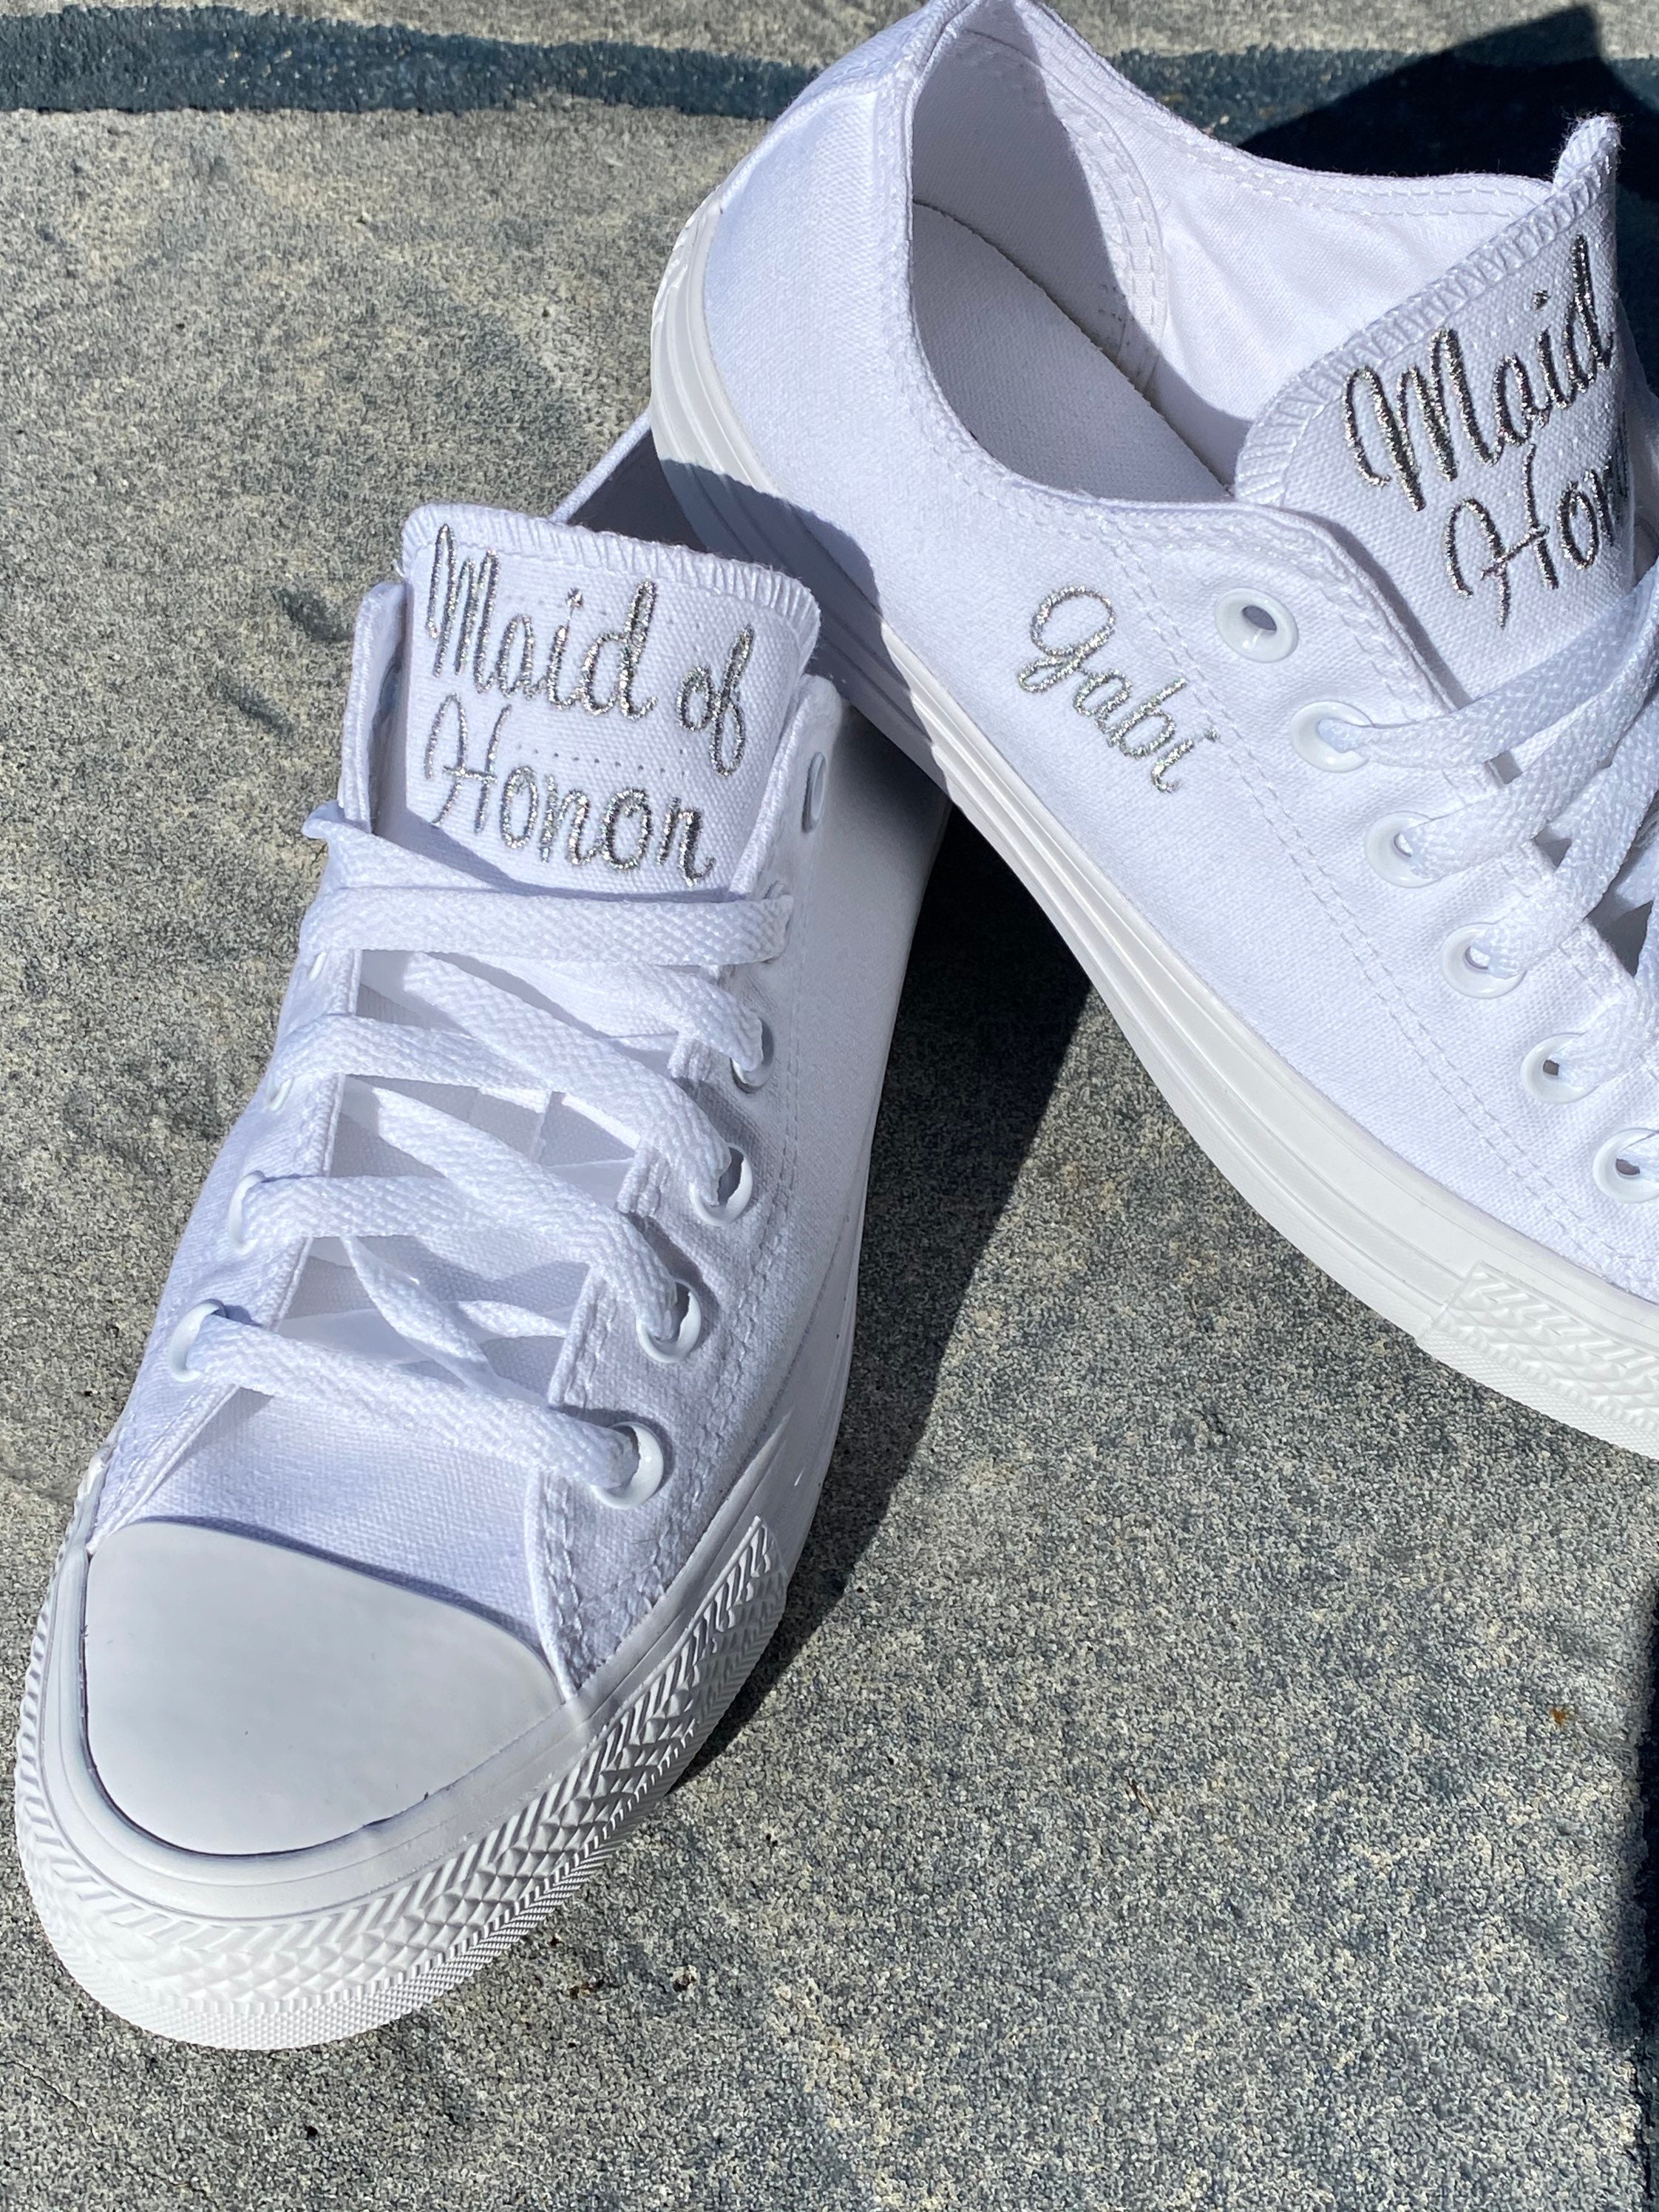 Maid of Honor Shoes Matron of Honor Shoes Wedding - Etsy Denmark